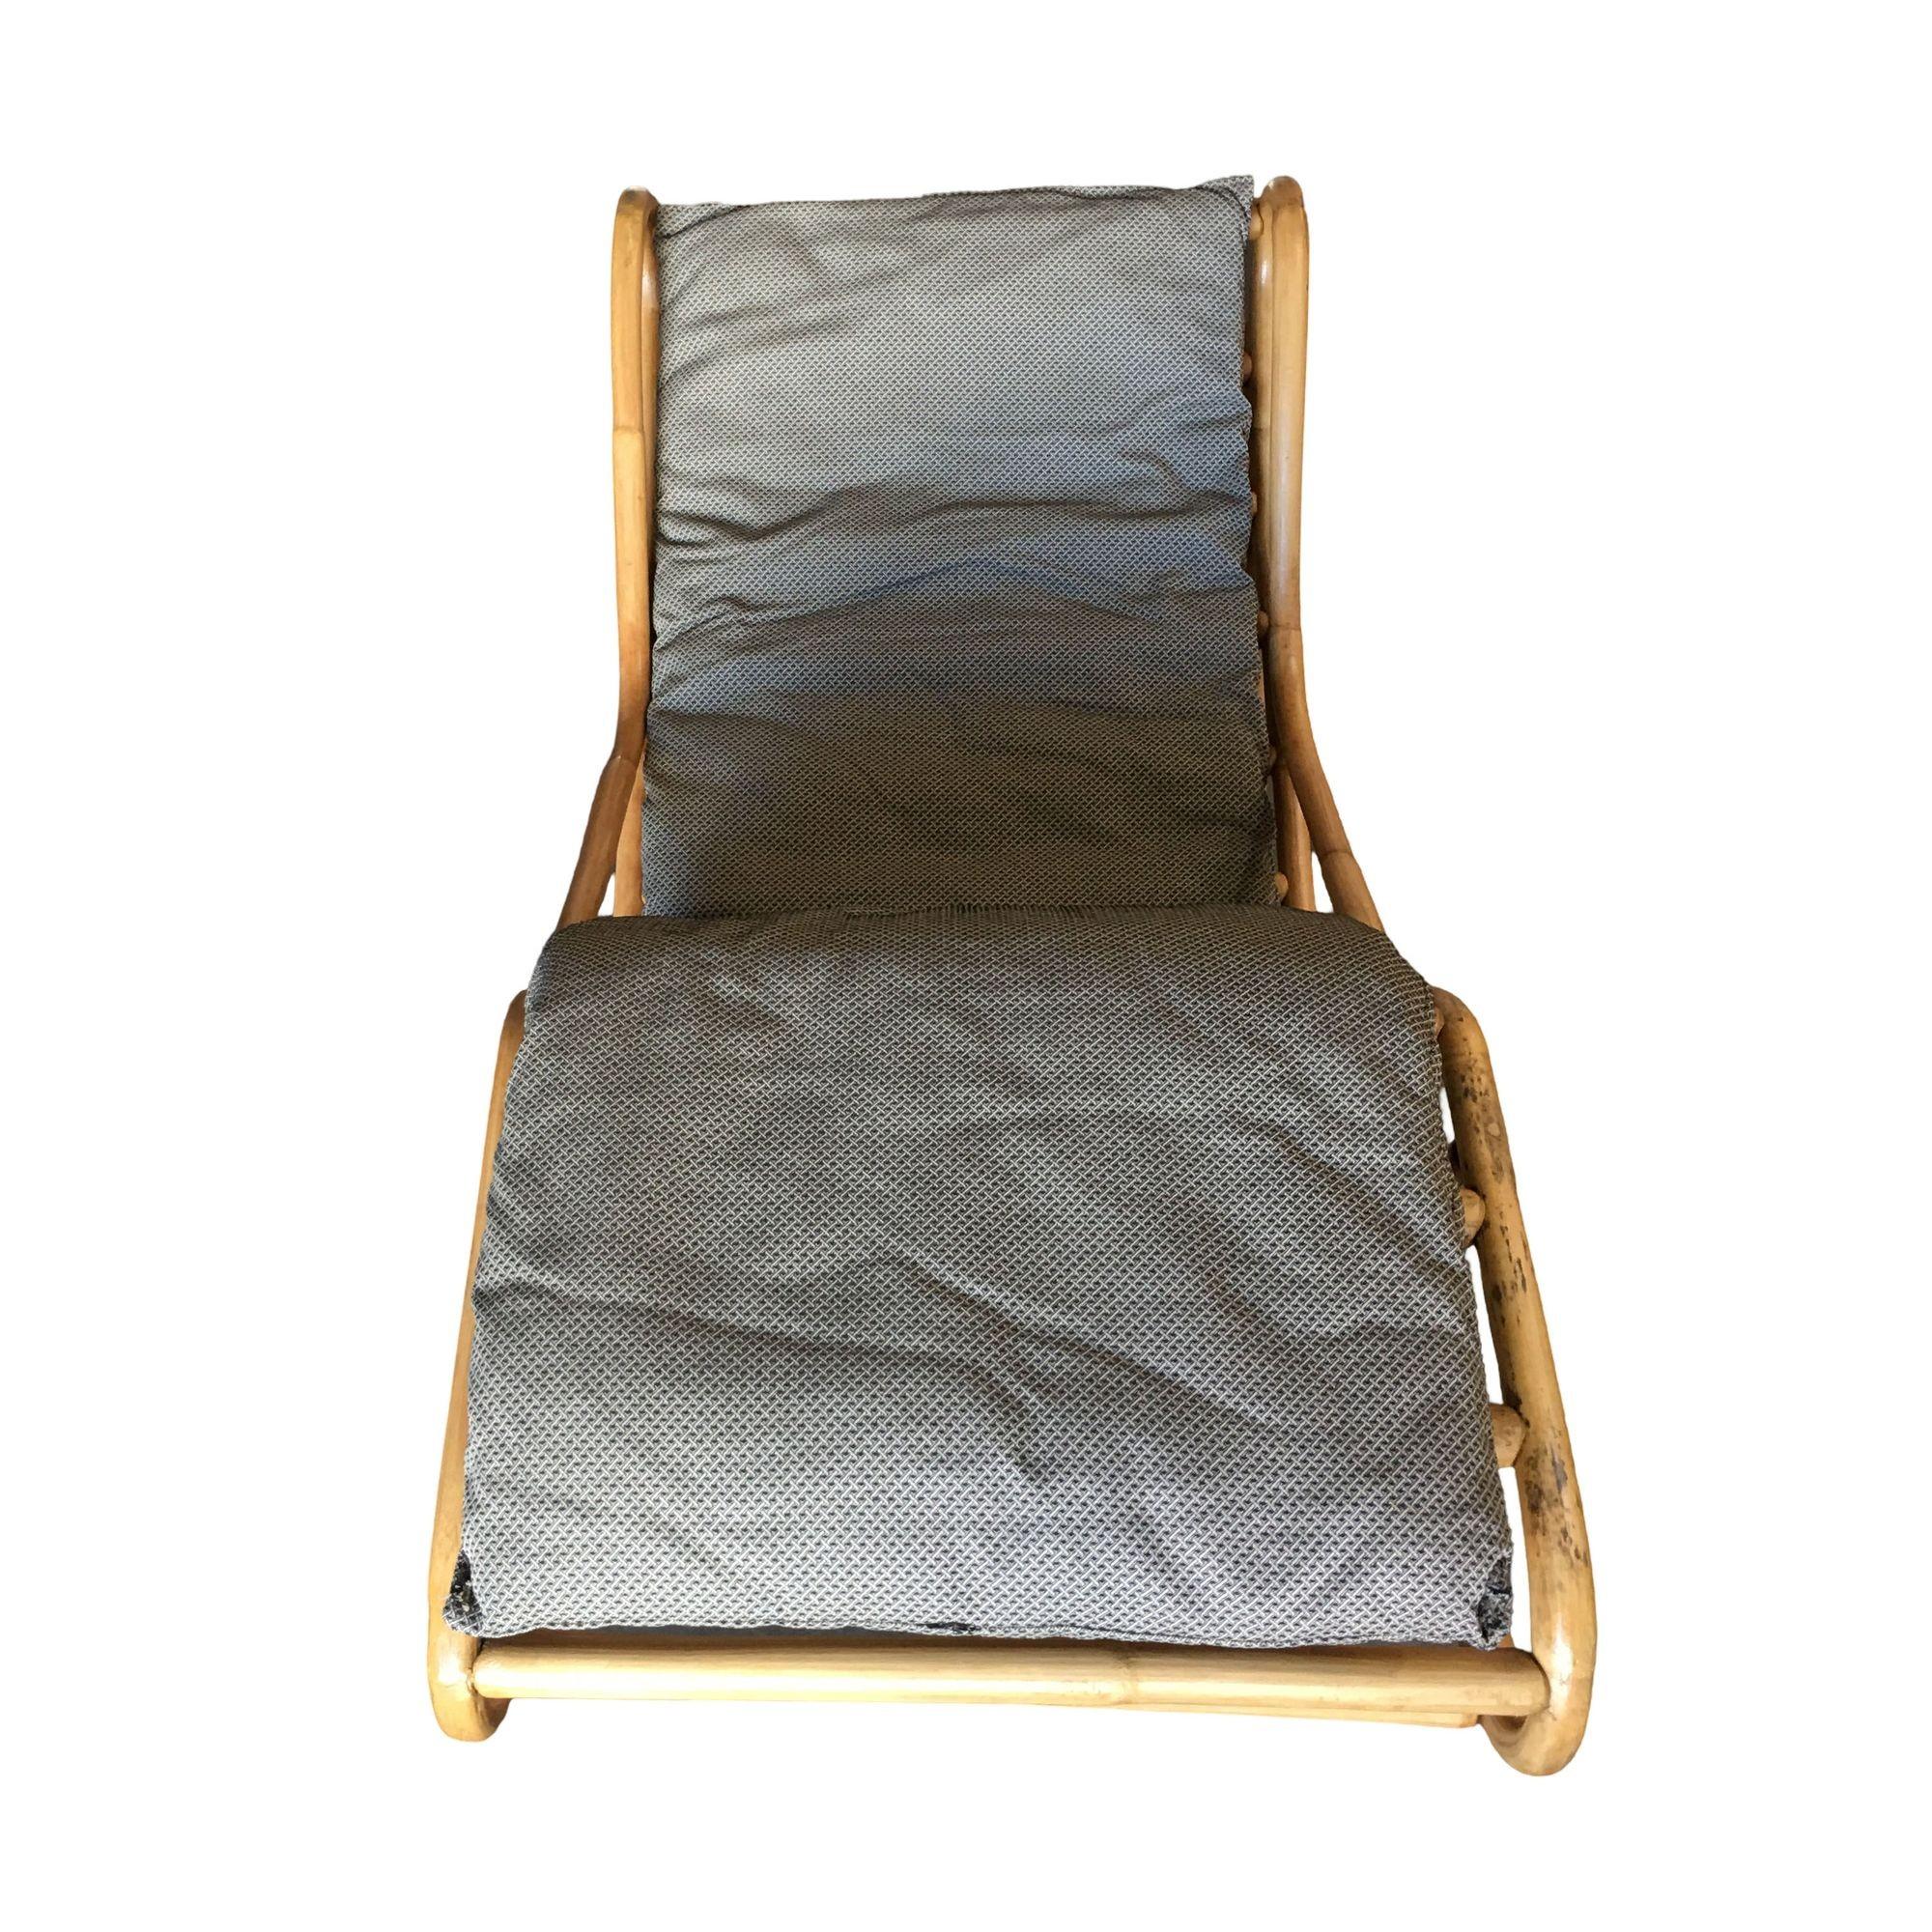 Restored single-strand rattan chaise lounge chair which rocks into two fixed positions for extra comfort, includes new cushions.

Custom cushions are included in the price, simply supply the fabric and we have the cushions made for you. If you need